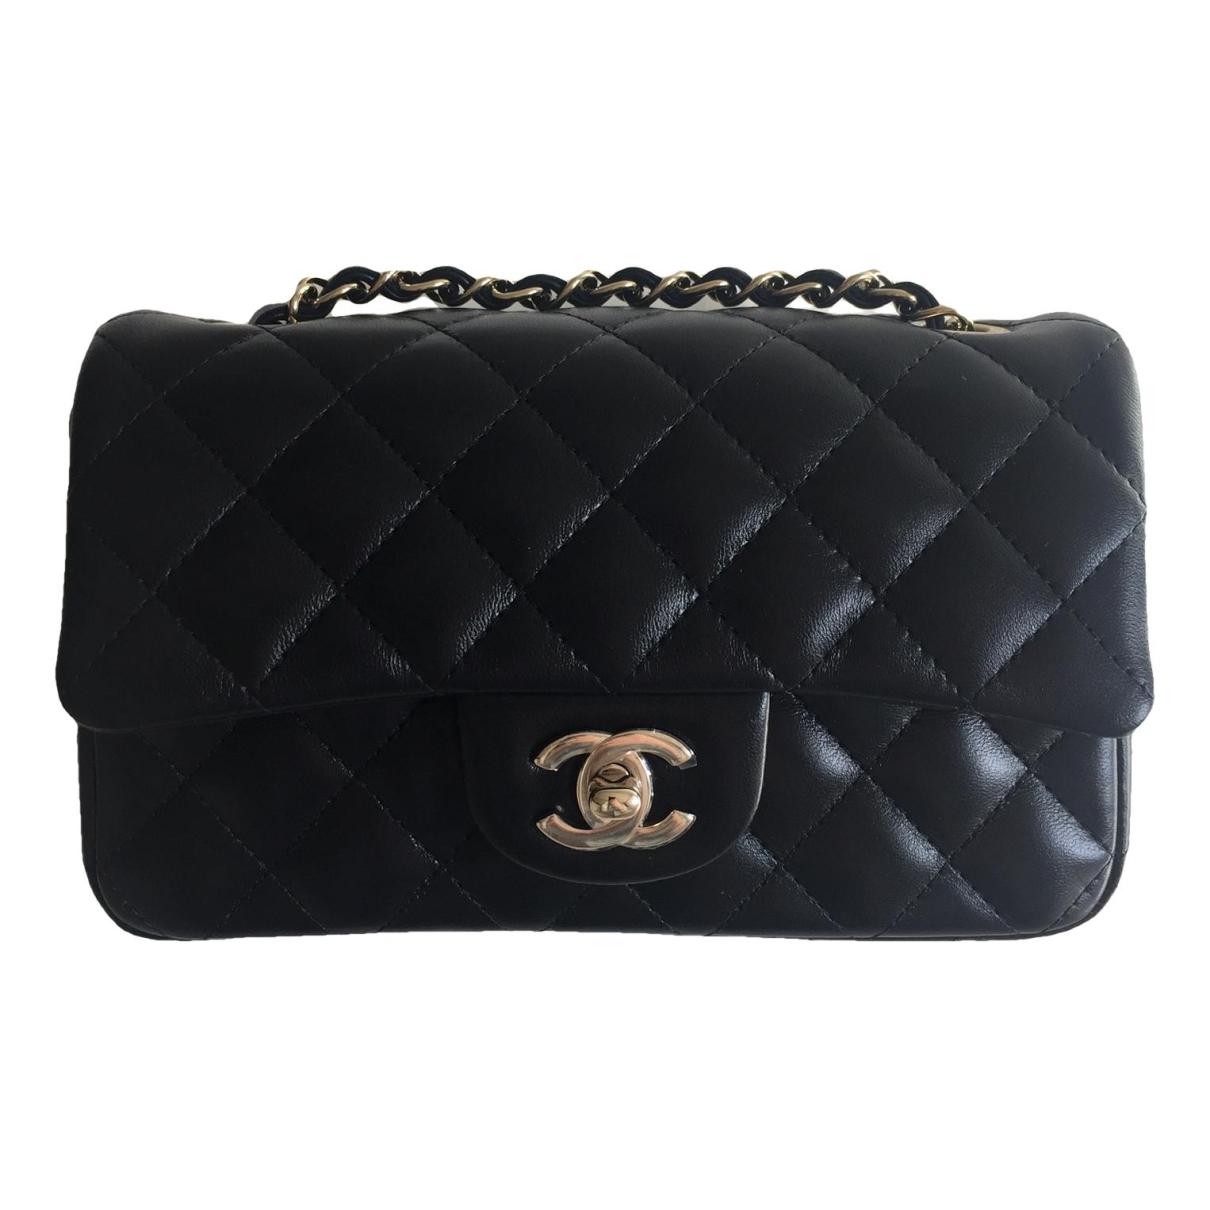 Timeless/classique leather crossbody bag Chanel Black in Leather - 36090647